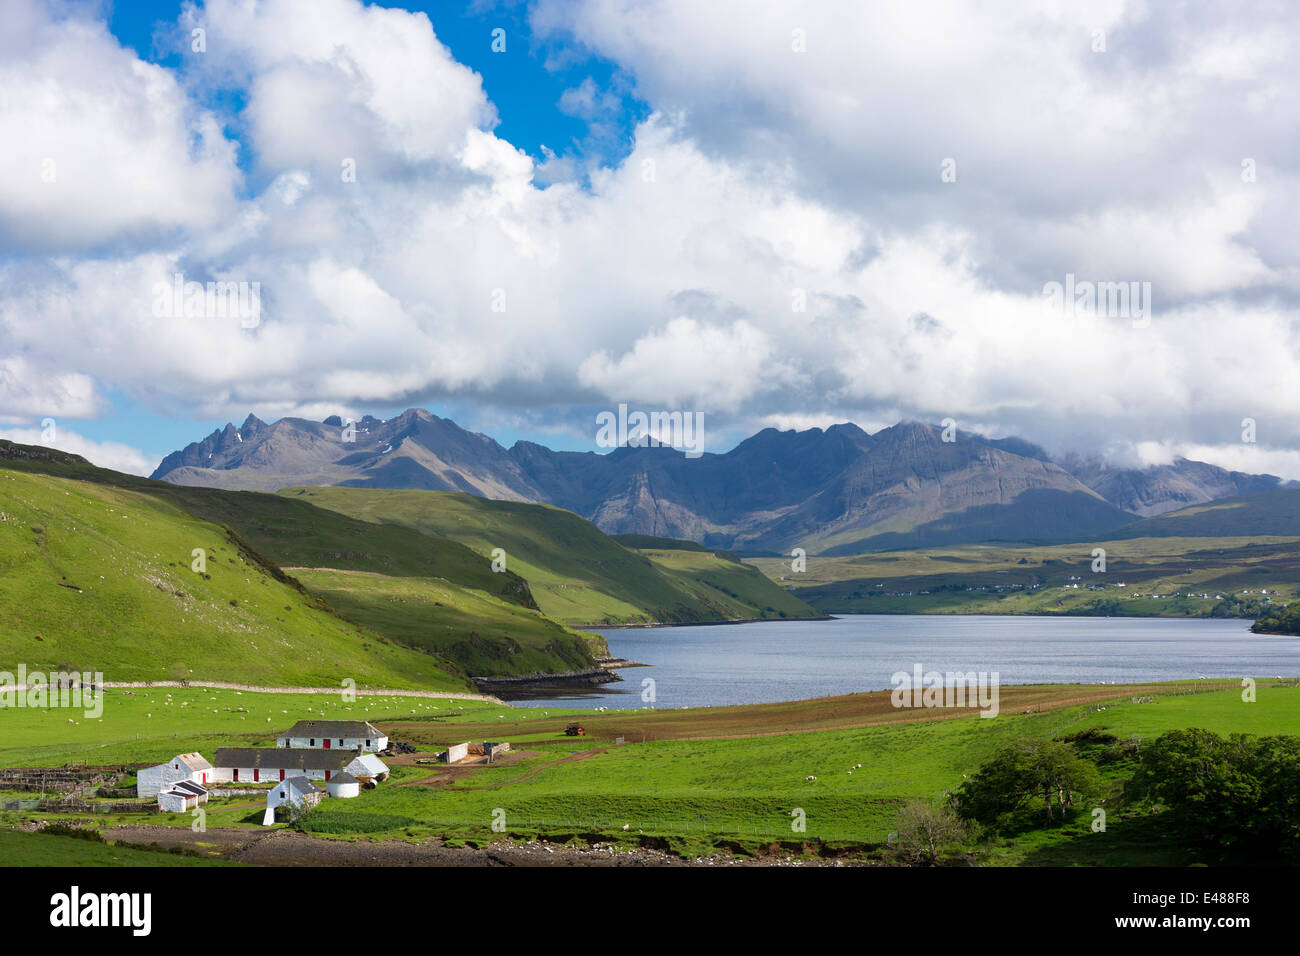 Cuillin mountain range - Cuillins - croft farm, sheep and Loch Harport on Isle of Skye in the Highlands and Islands of SCOTLAND Stock Photo